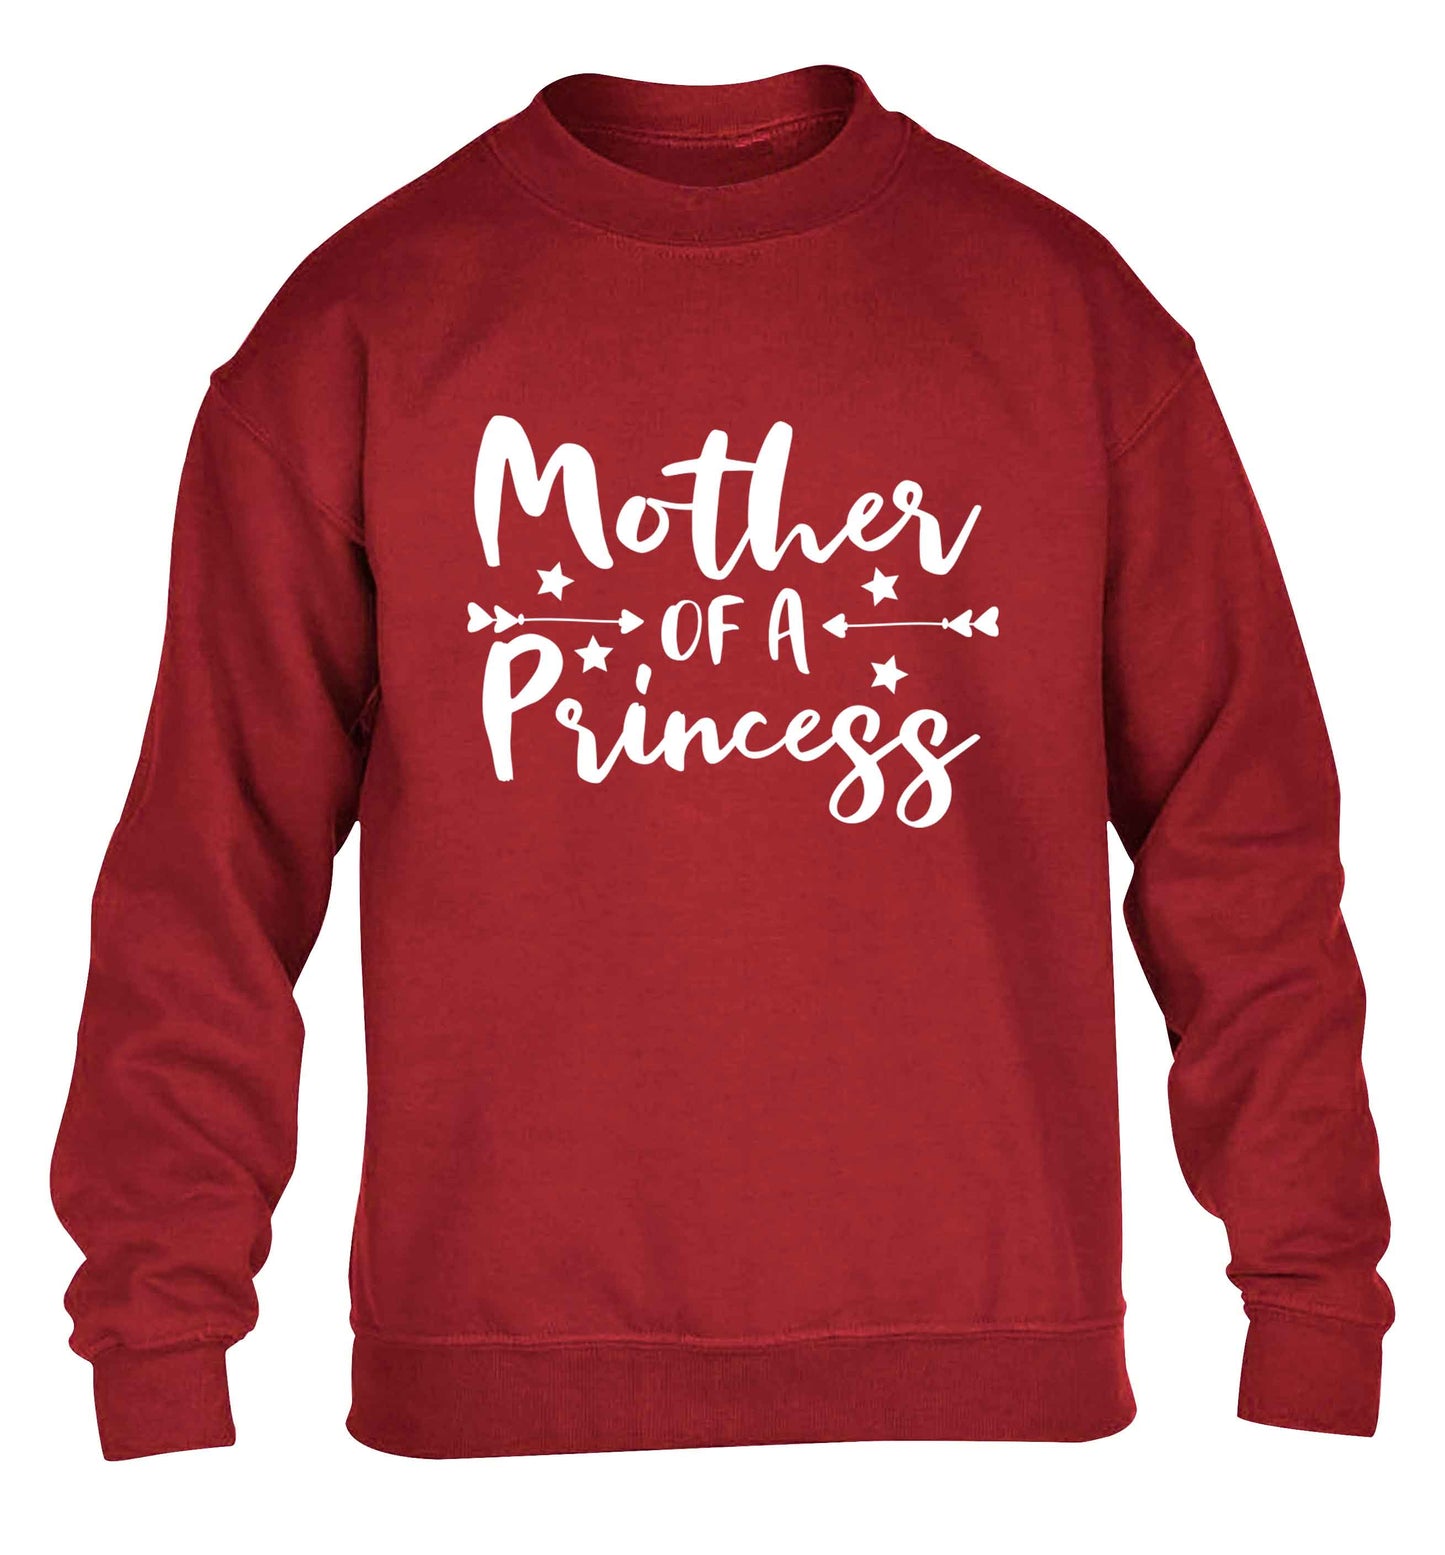 Mother of a princess children's grey sweater 12-13 Years